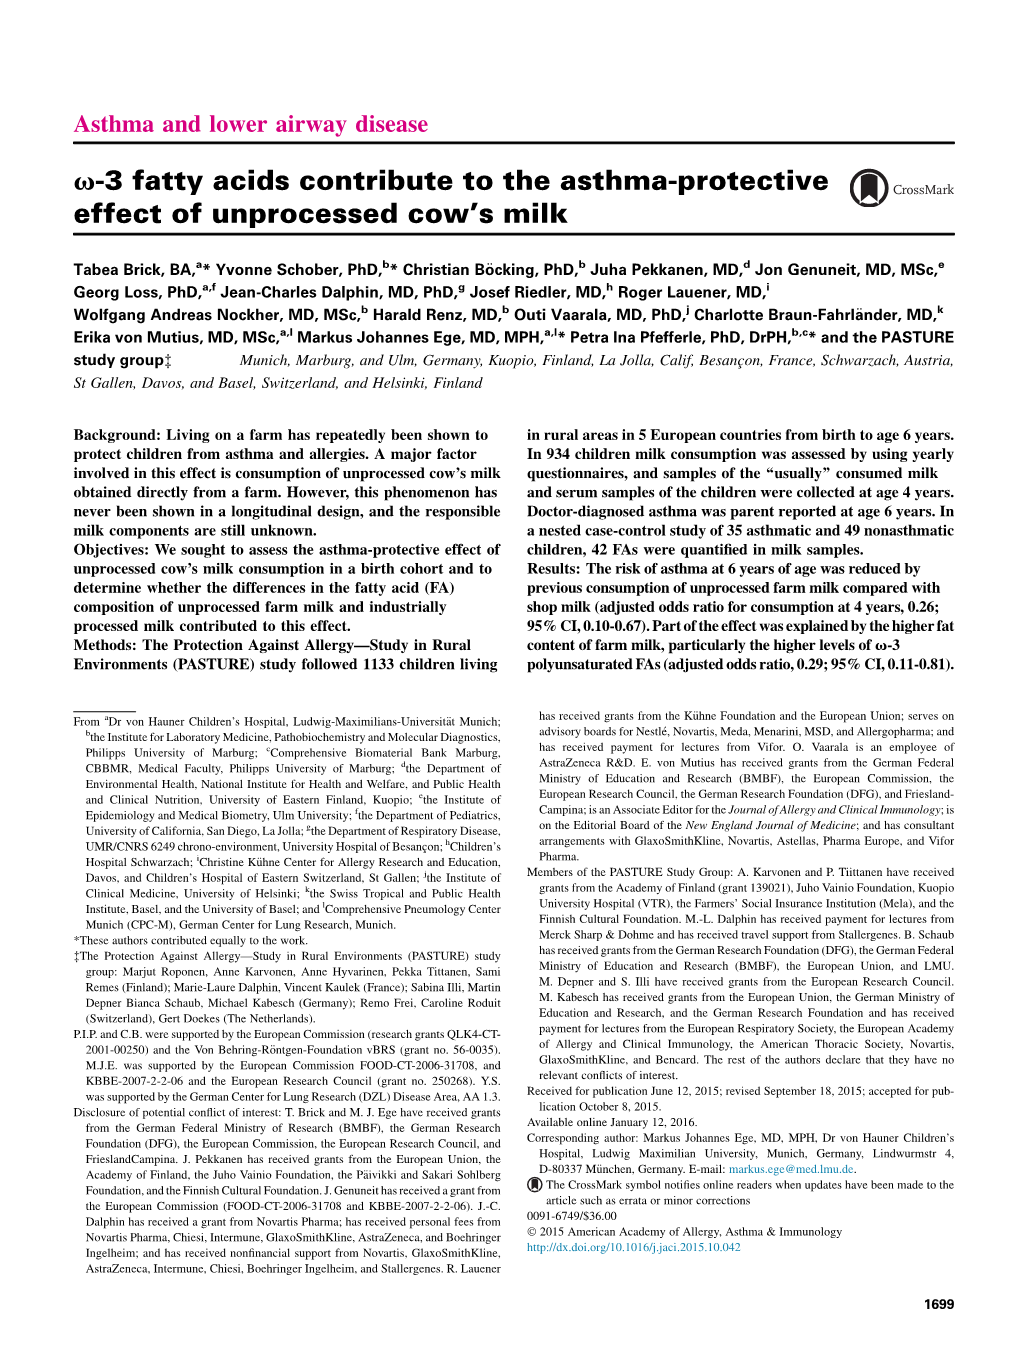 V-3 Fatty Acids Contribute to the Asthma-Protective Effect of Unprocessed Cow’S Milk